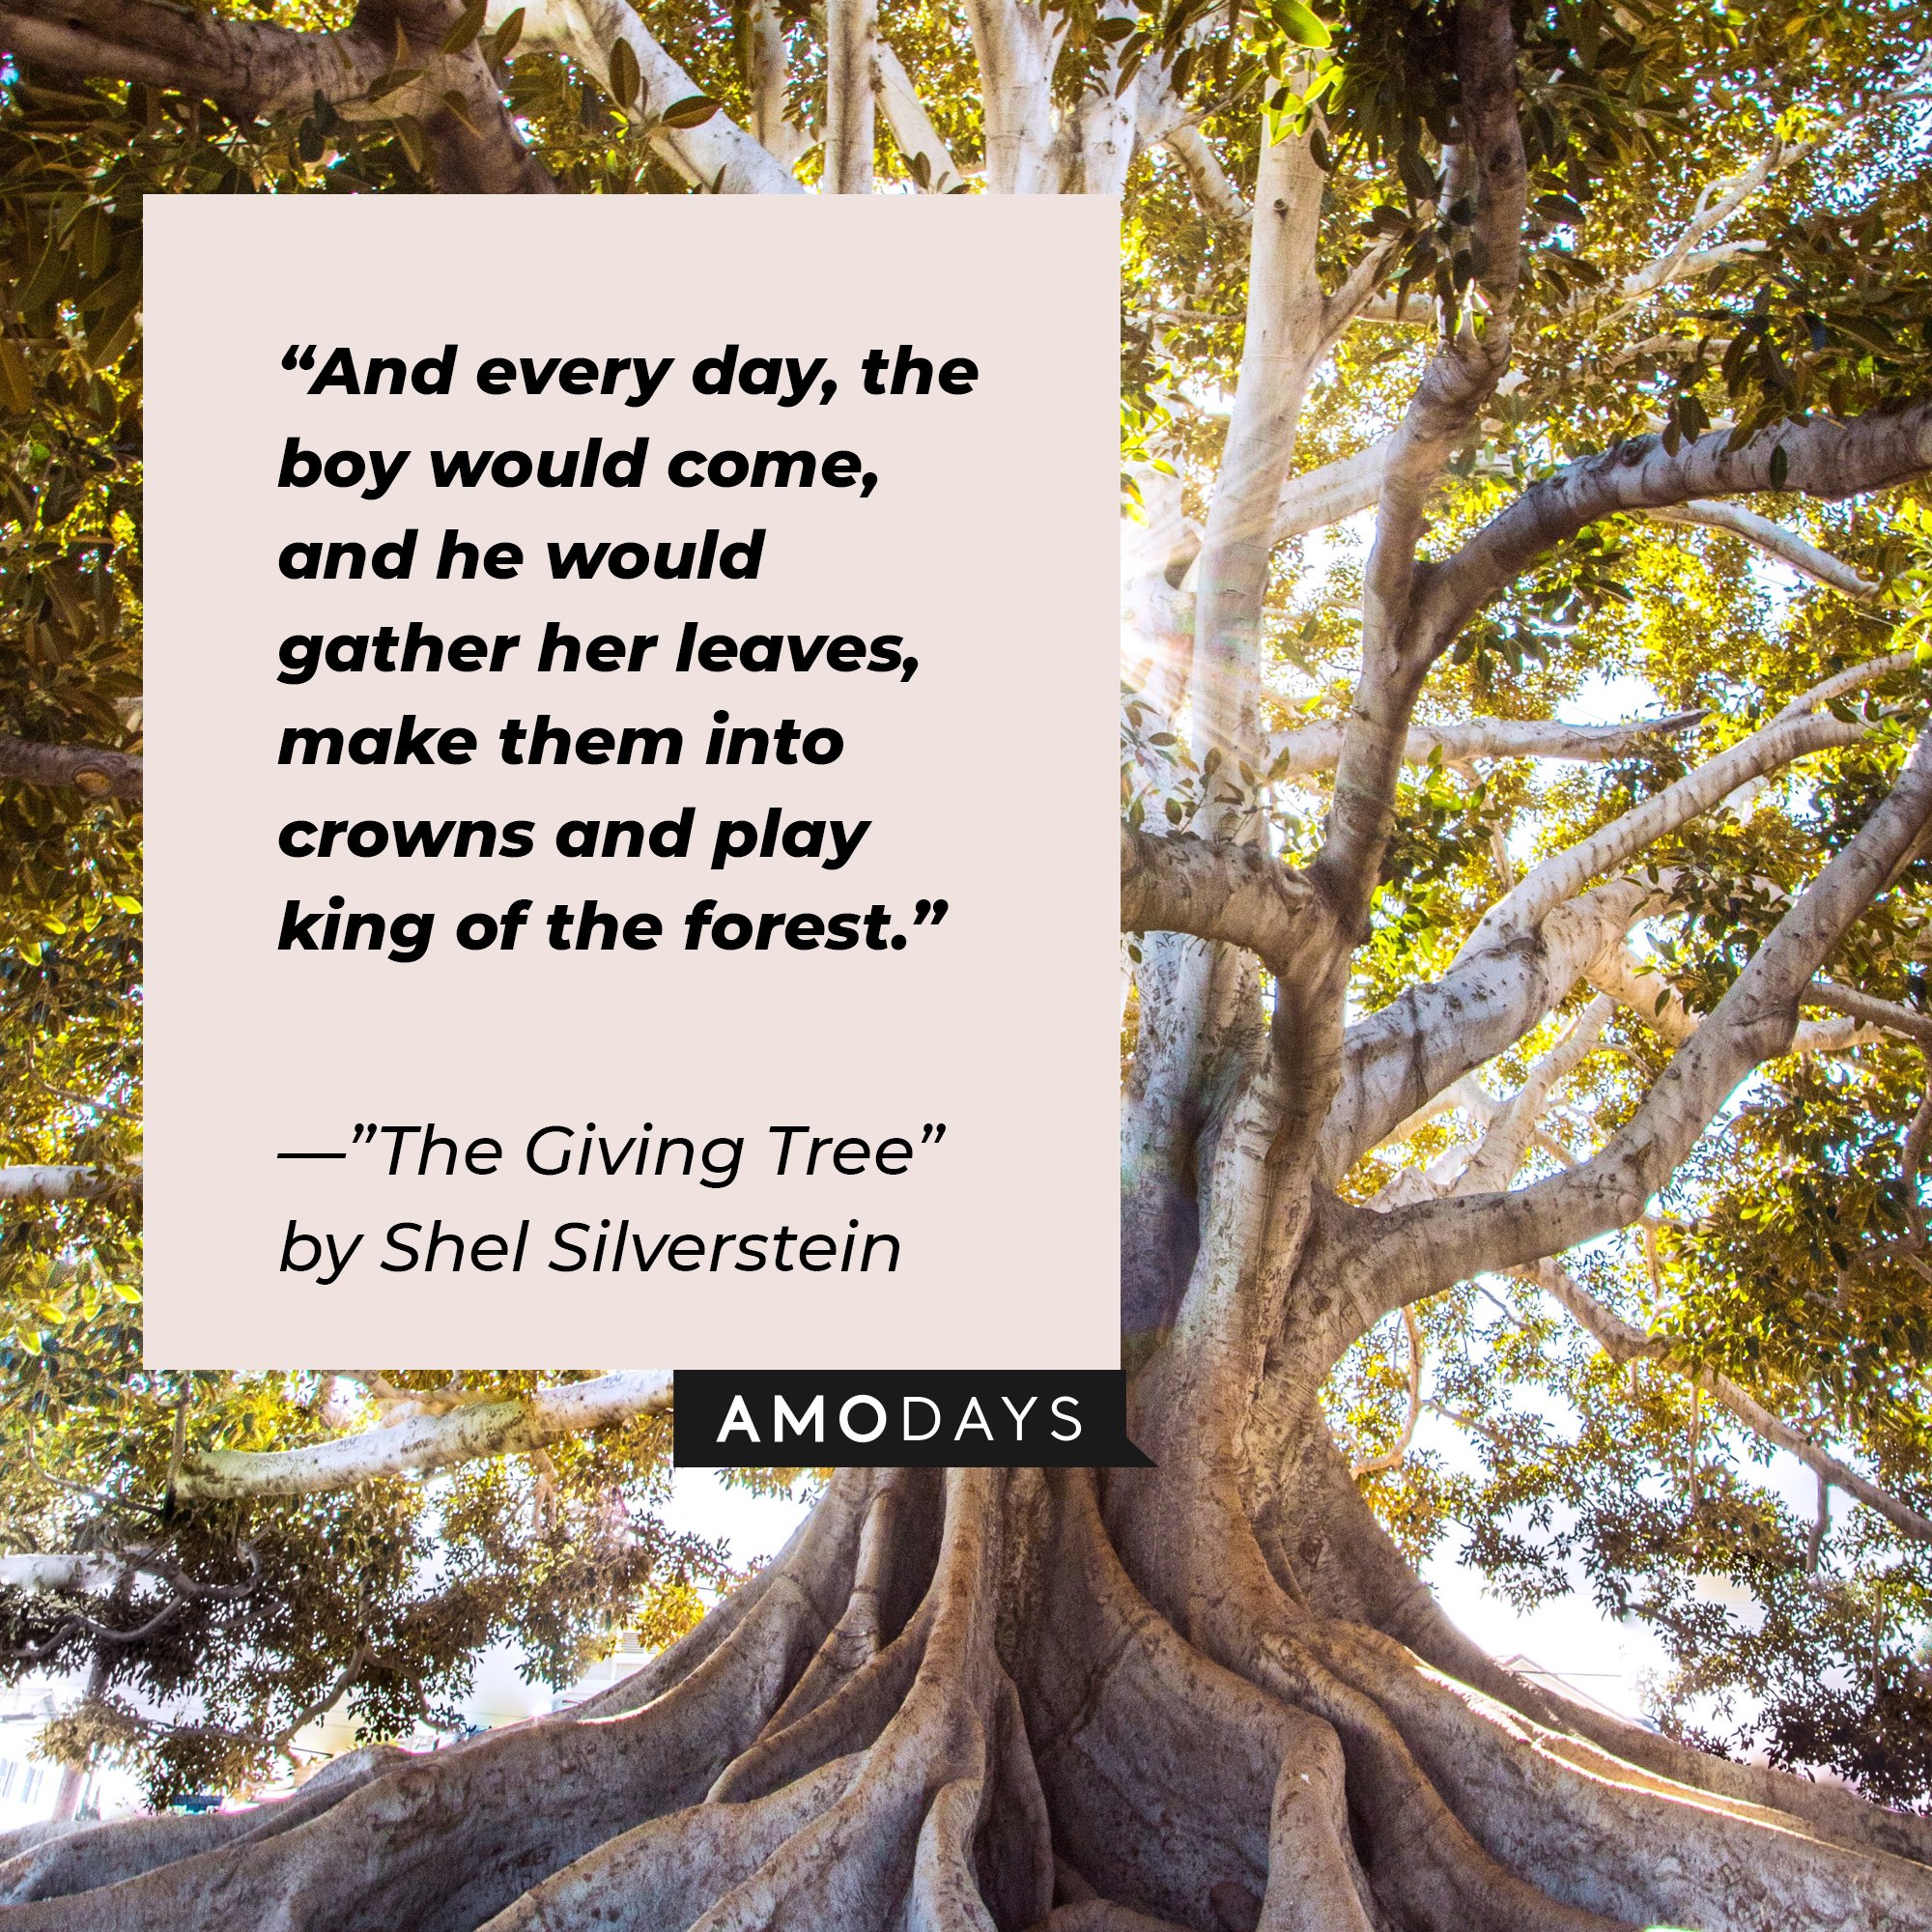 Quotes from Shel Silverstein’s "Giving Tree”: "And every day, the boy would come, and he would gather her leaves, make them into crowns and play king of the forest." | Image: AmoDays